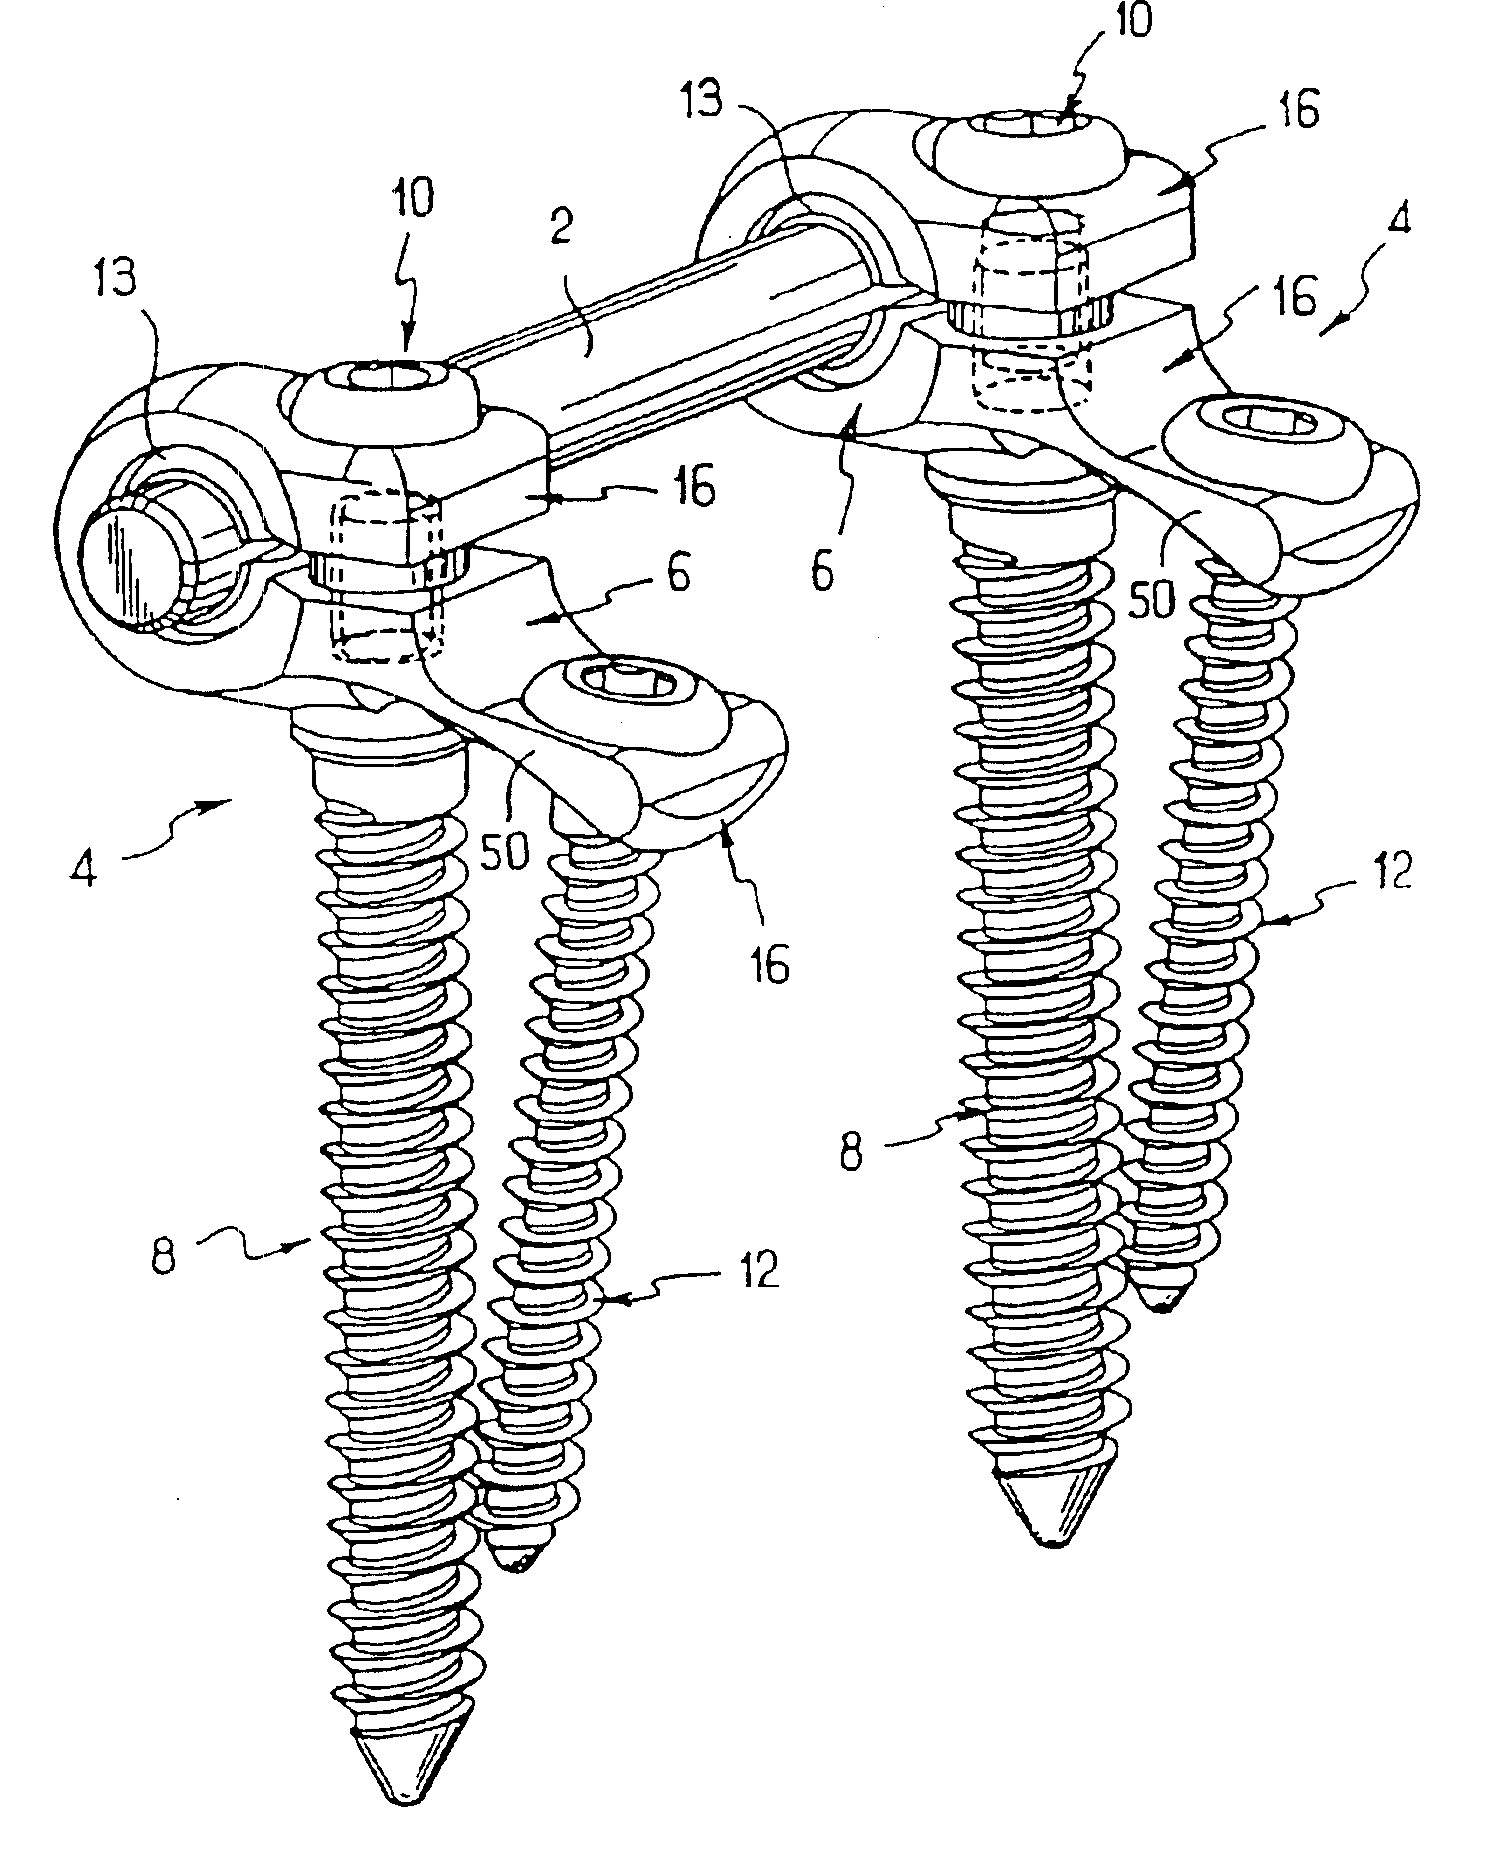 Backbone osteosynthesis system with clamping means in particular for anterior fixing